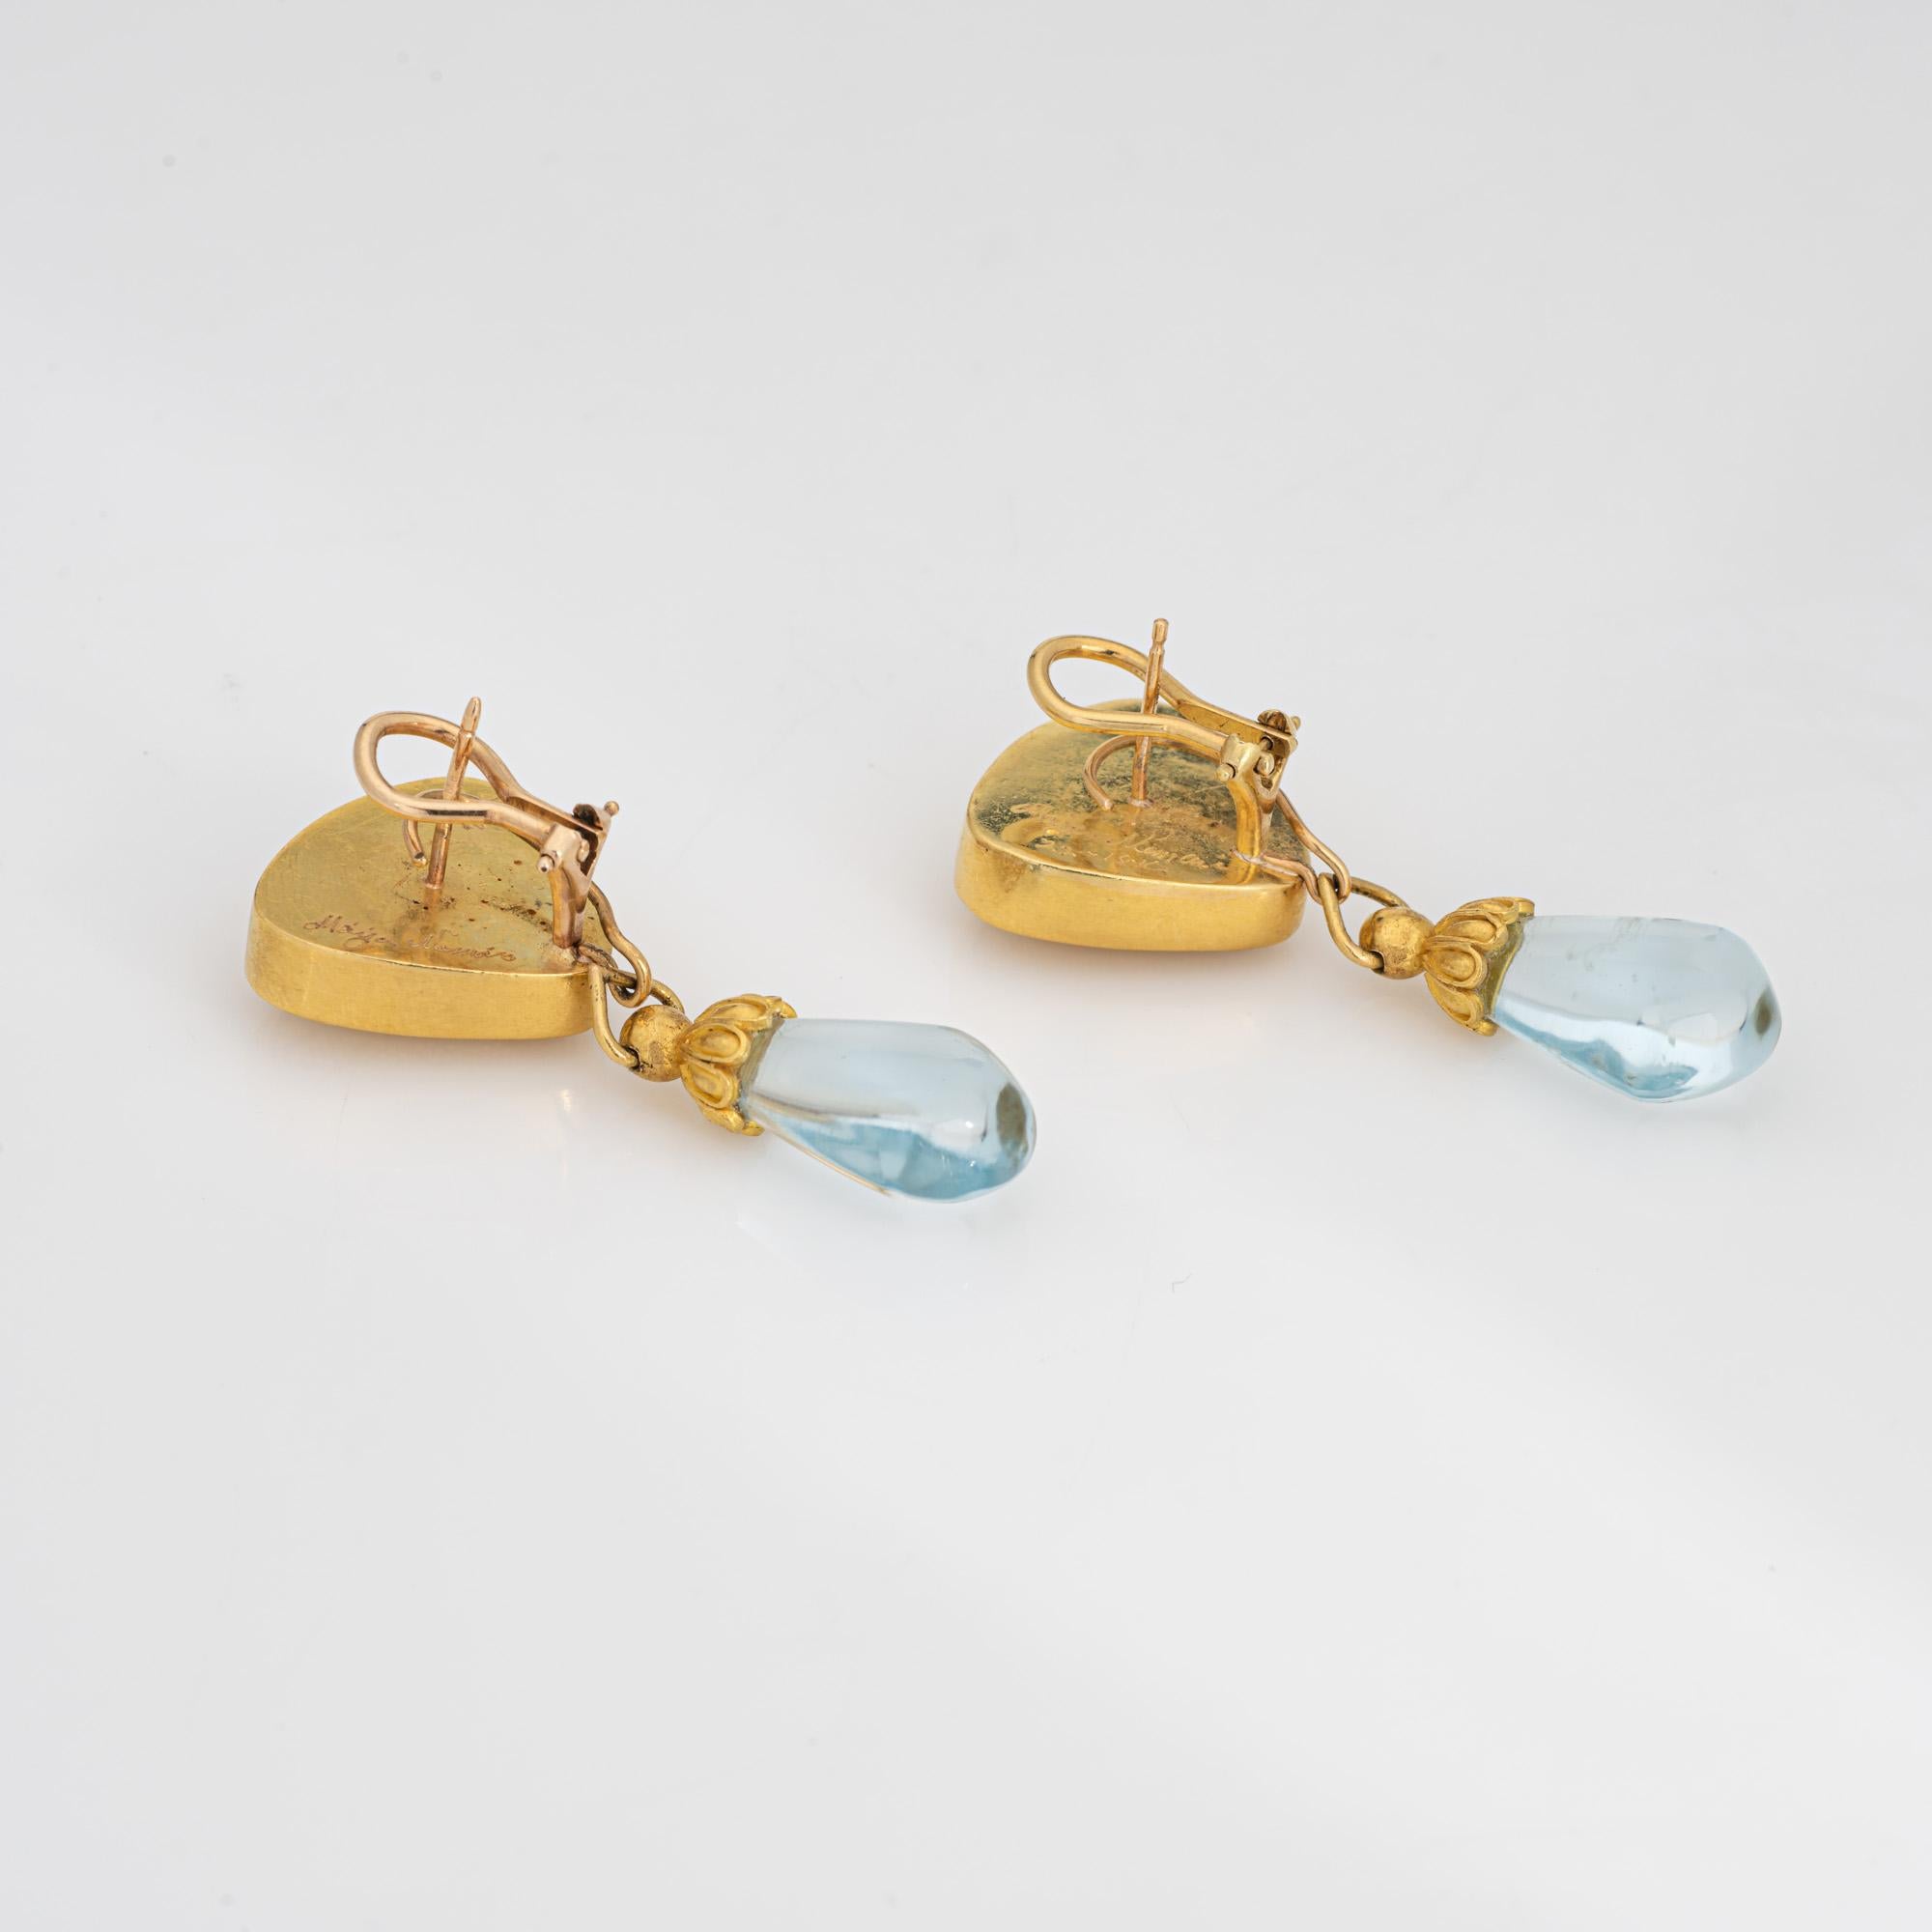 Stylish Maija Neimanis aquamarine earrings crafted in 22k & 18k yellow gold.

Cabochon aquamarines measure 15mm x 12mm. The aquamarines are in very good condition and free of cracks or chips.  

Maija Neimanis was a renowned jewelry designer known